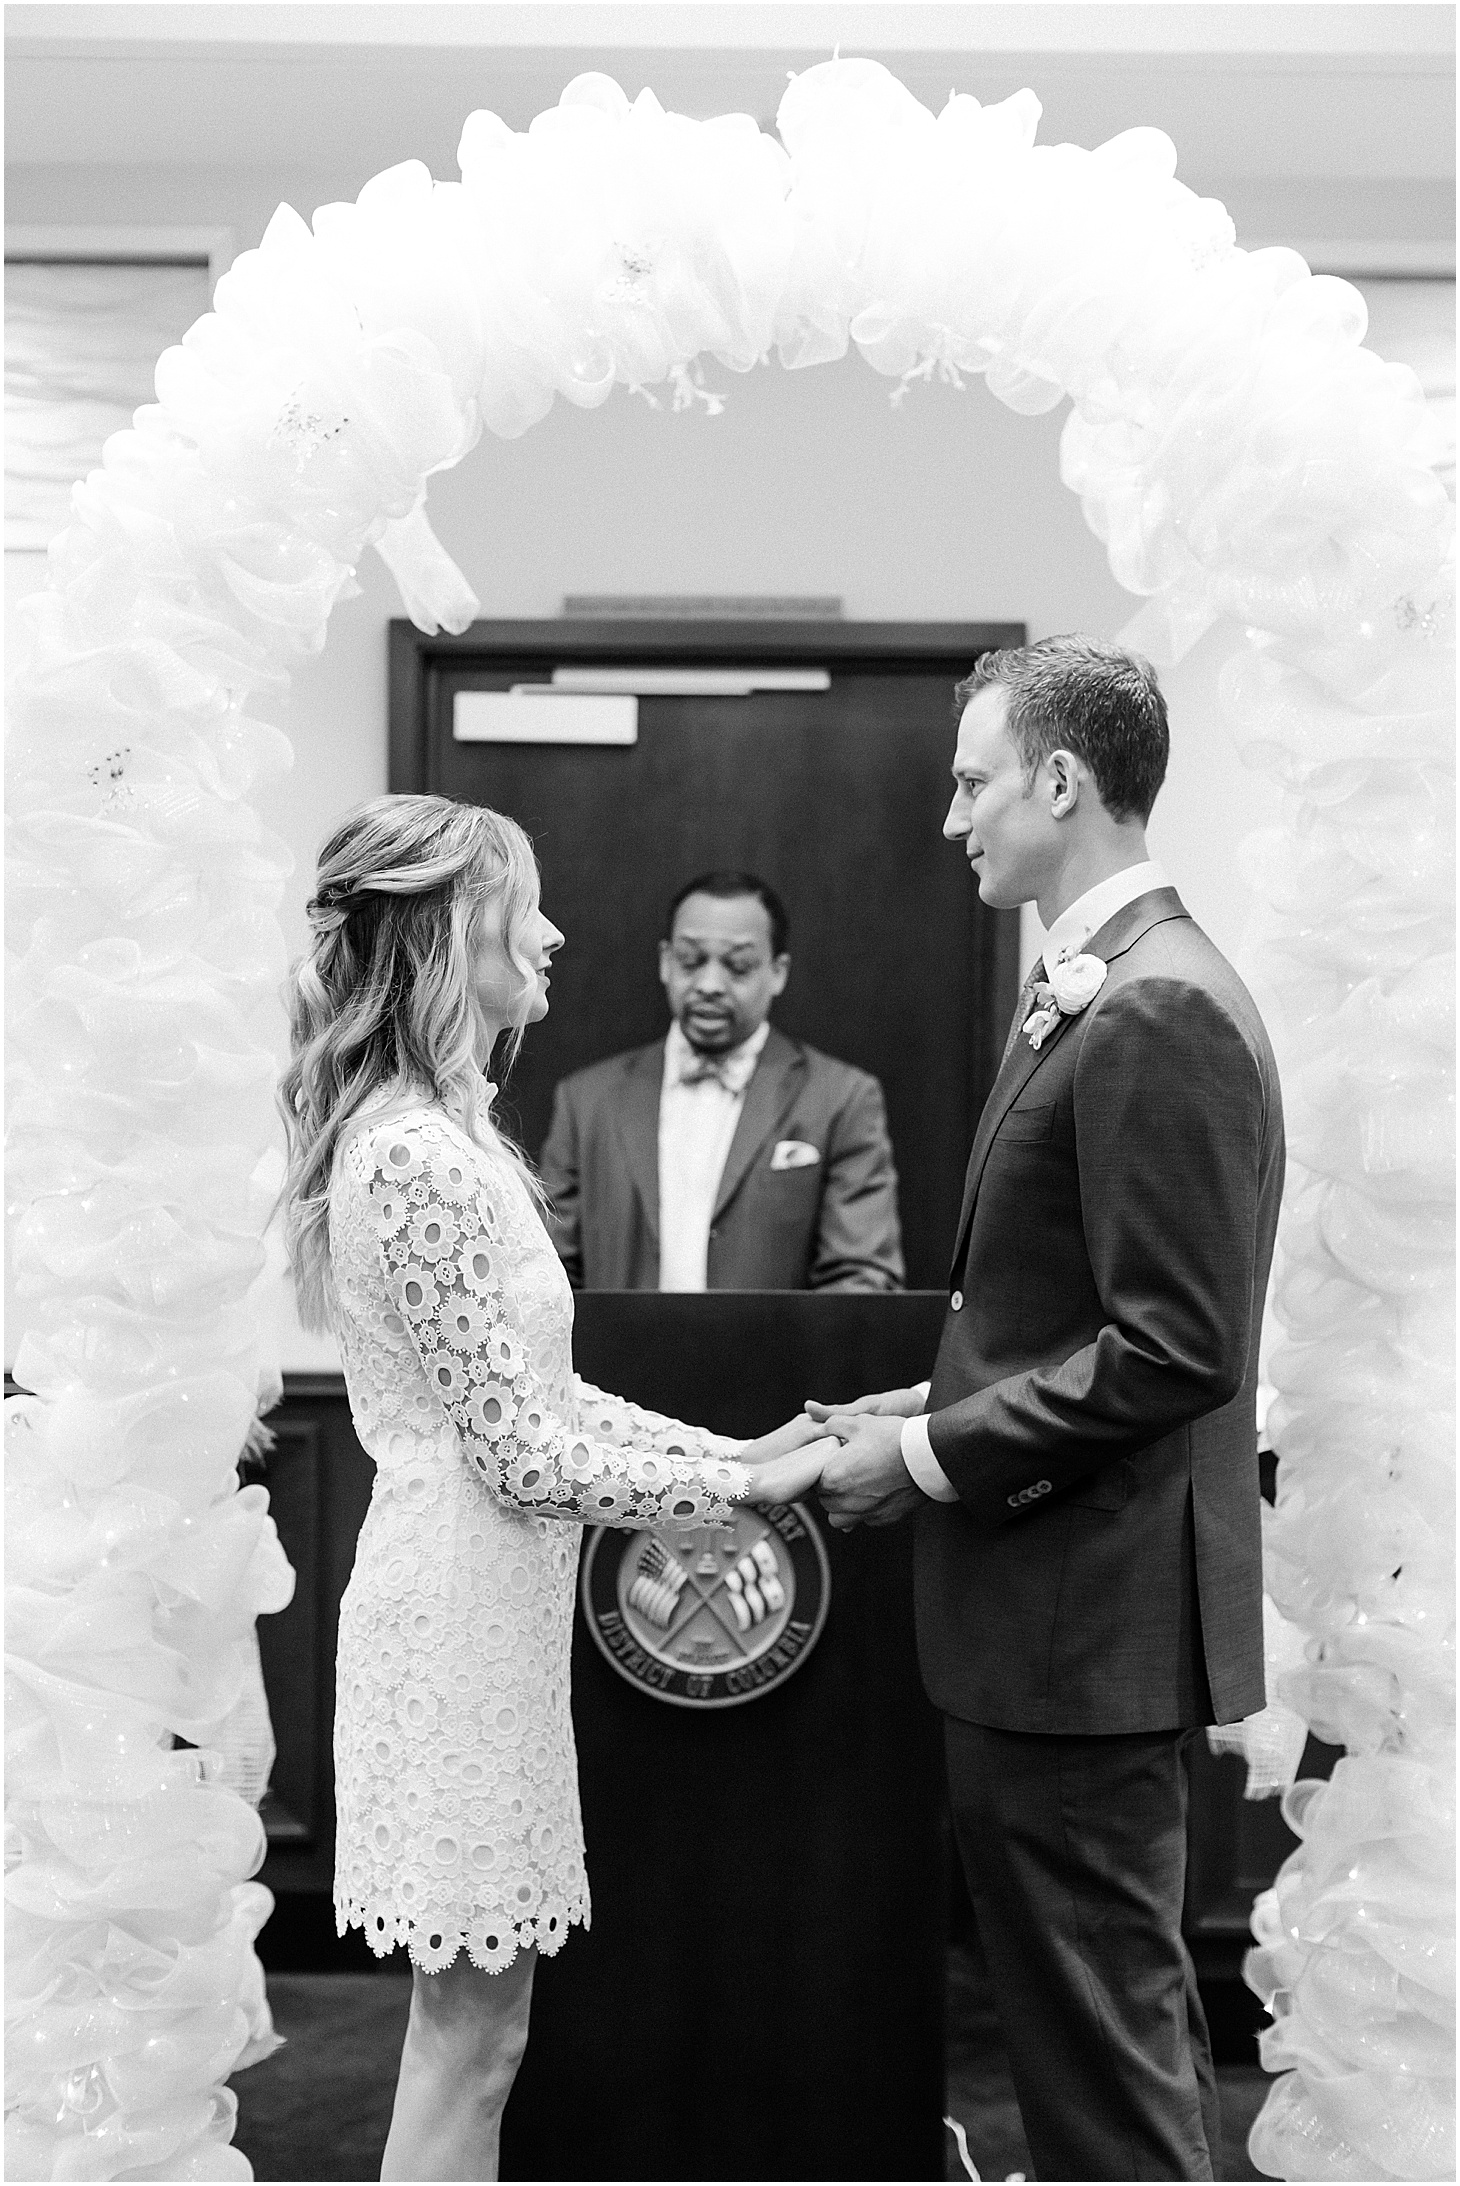 Wedding Ceremony at Moultrie Courthouse, Cherry Blossom Elopement in Washington DC, Sarah Bradshaw Photography